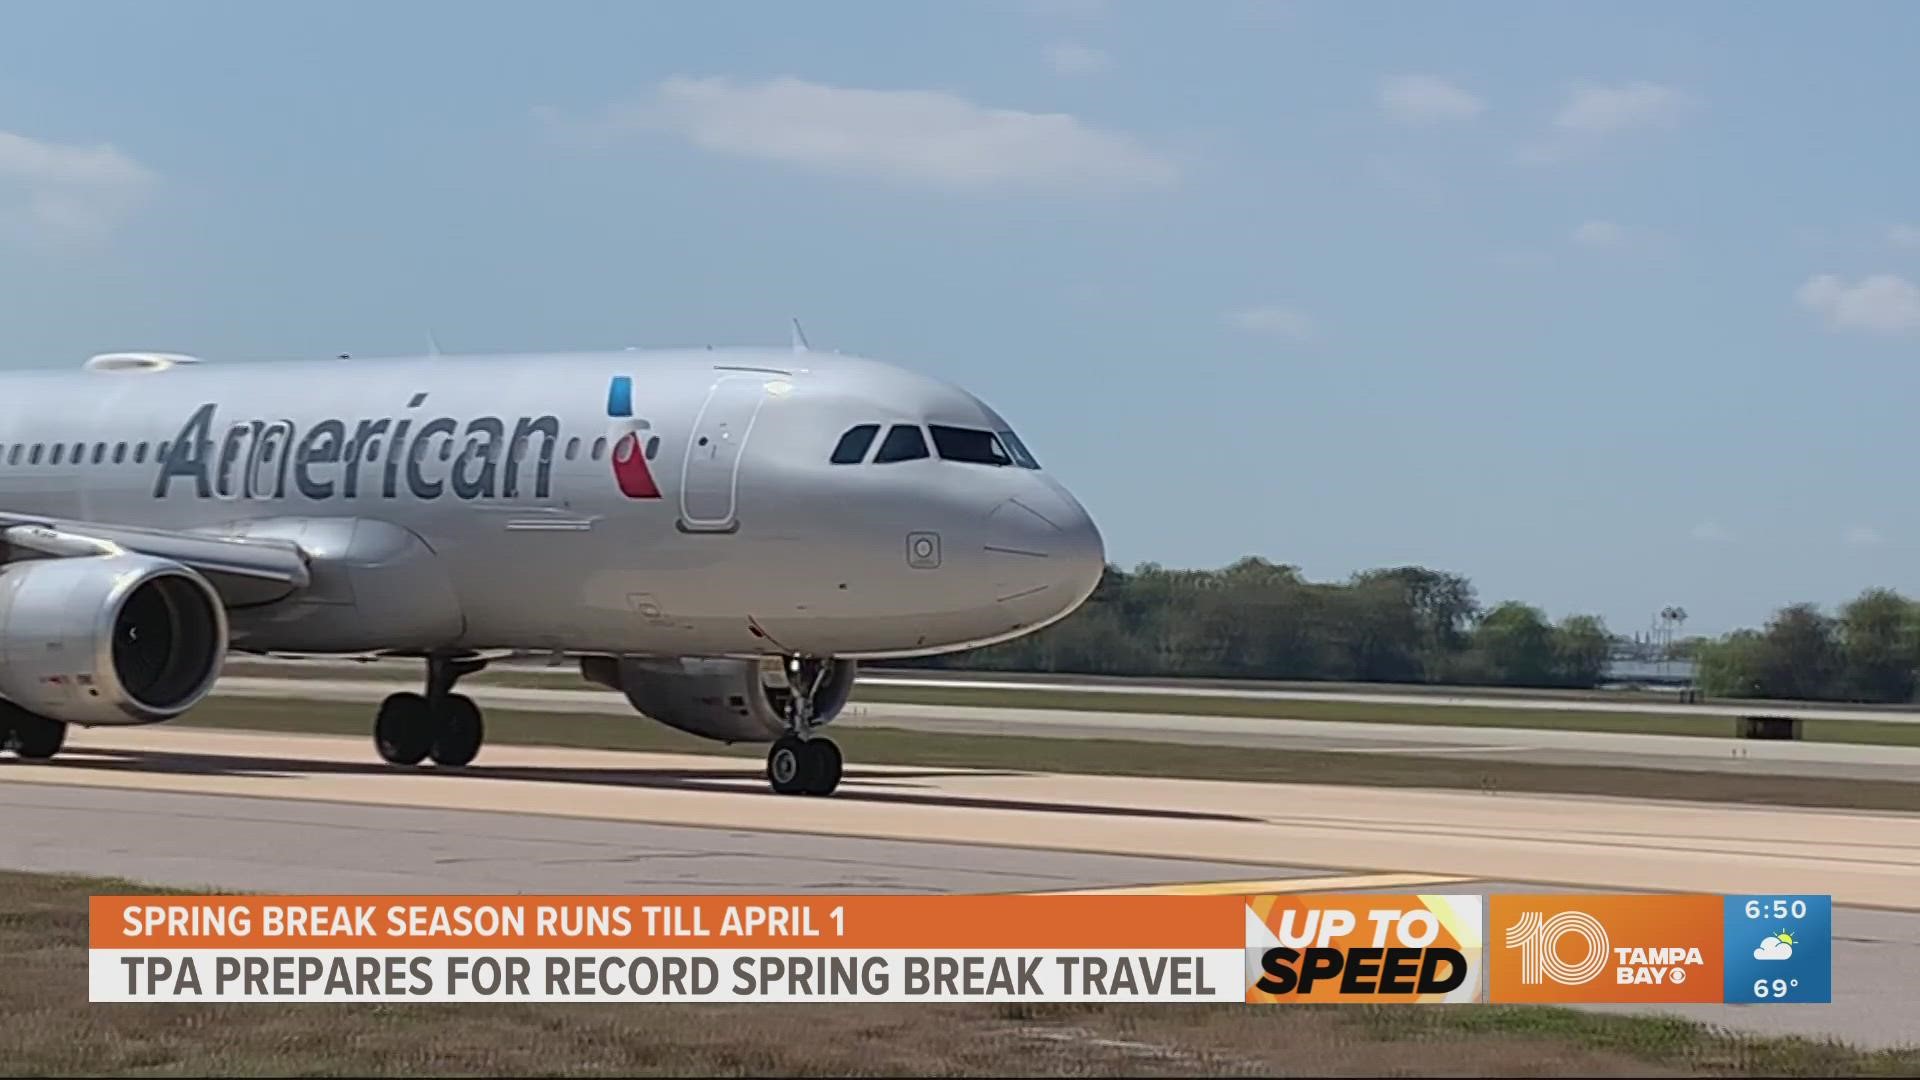 This Spring Break is expected to be Tampa International Airport's busiest ever.